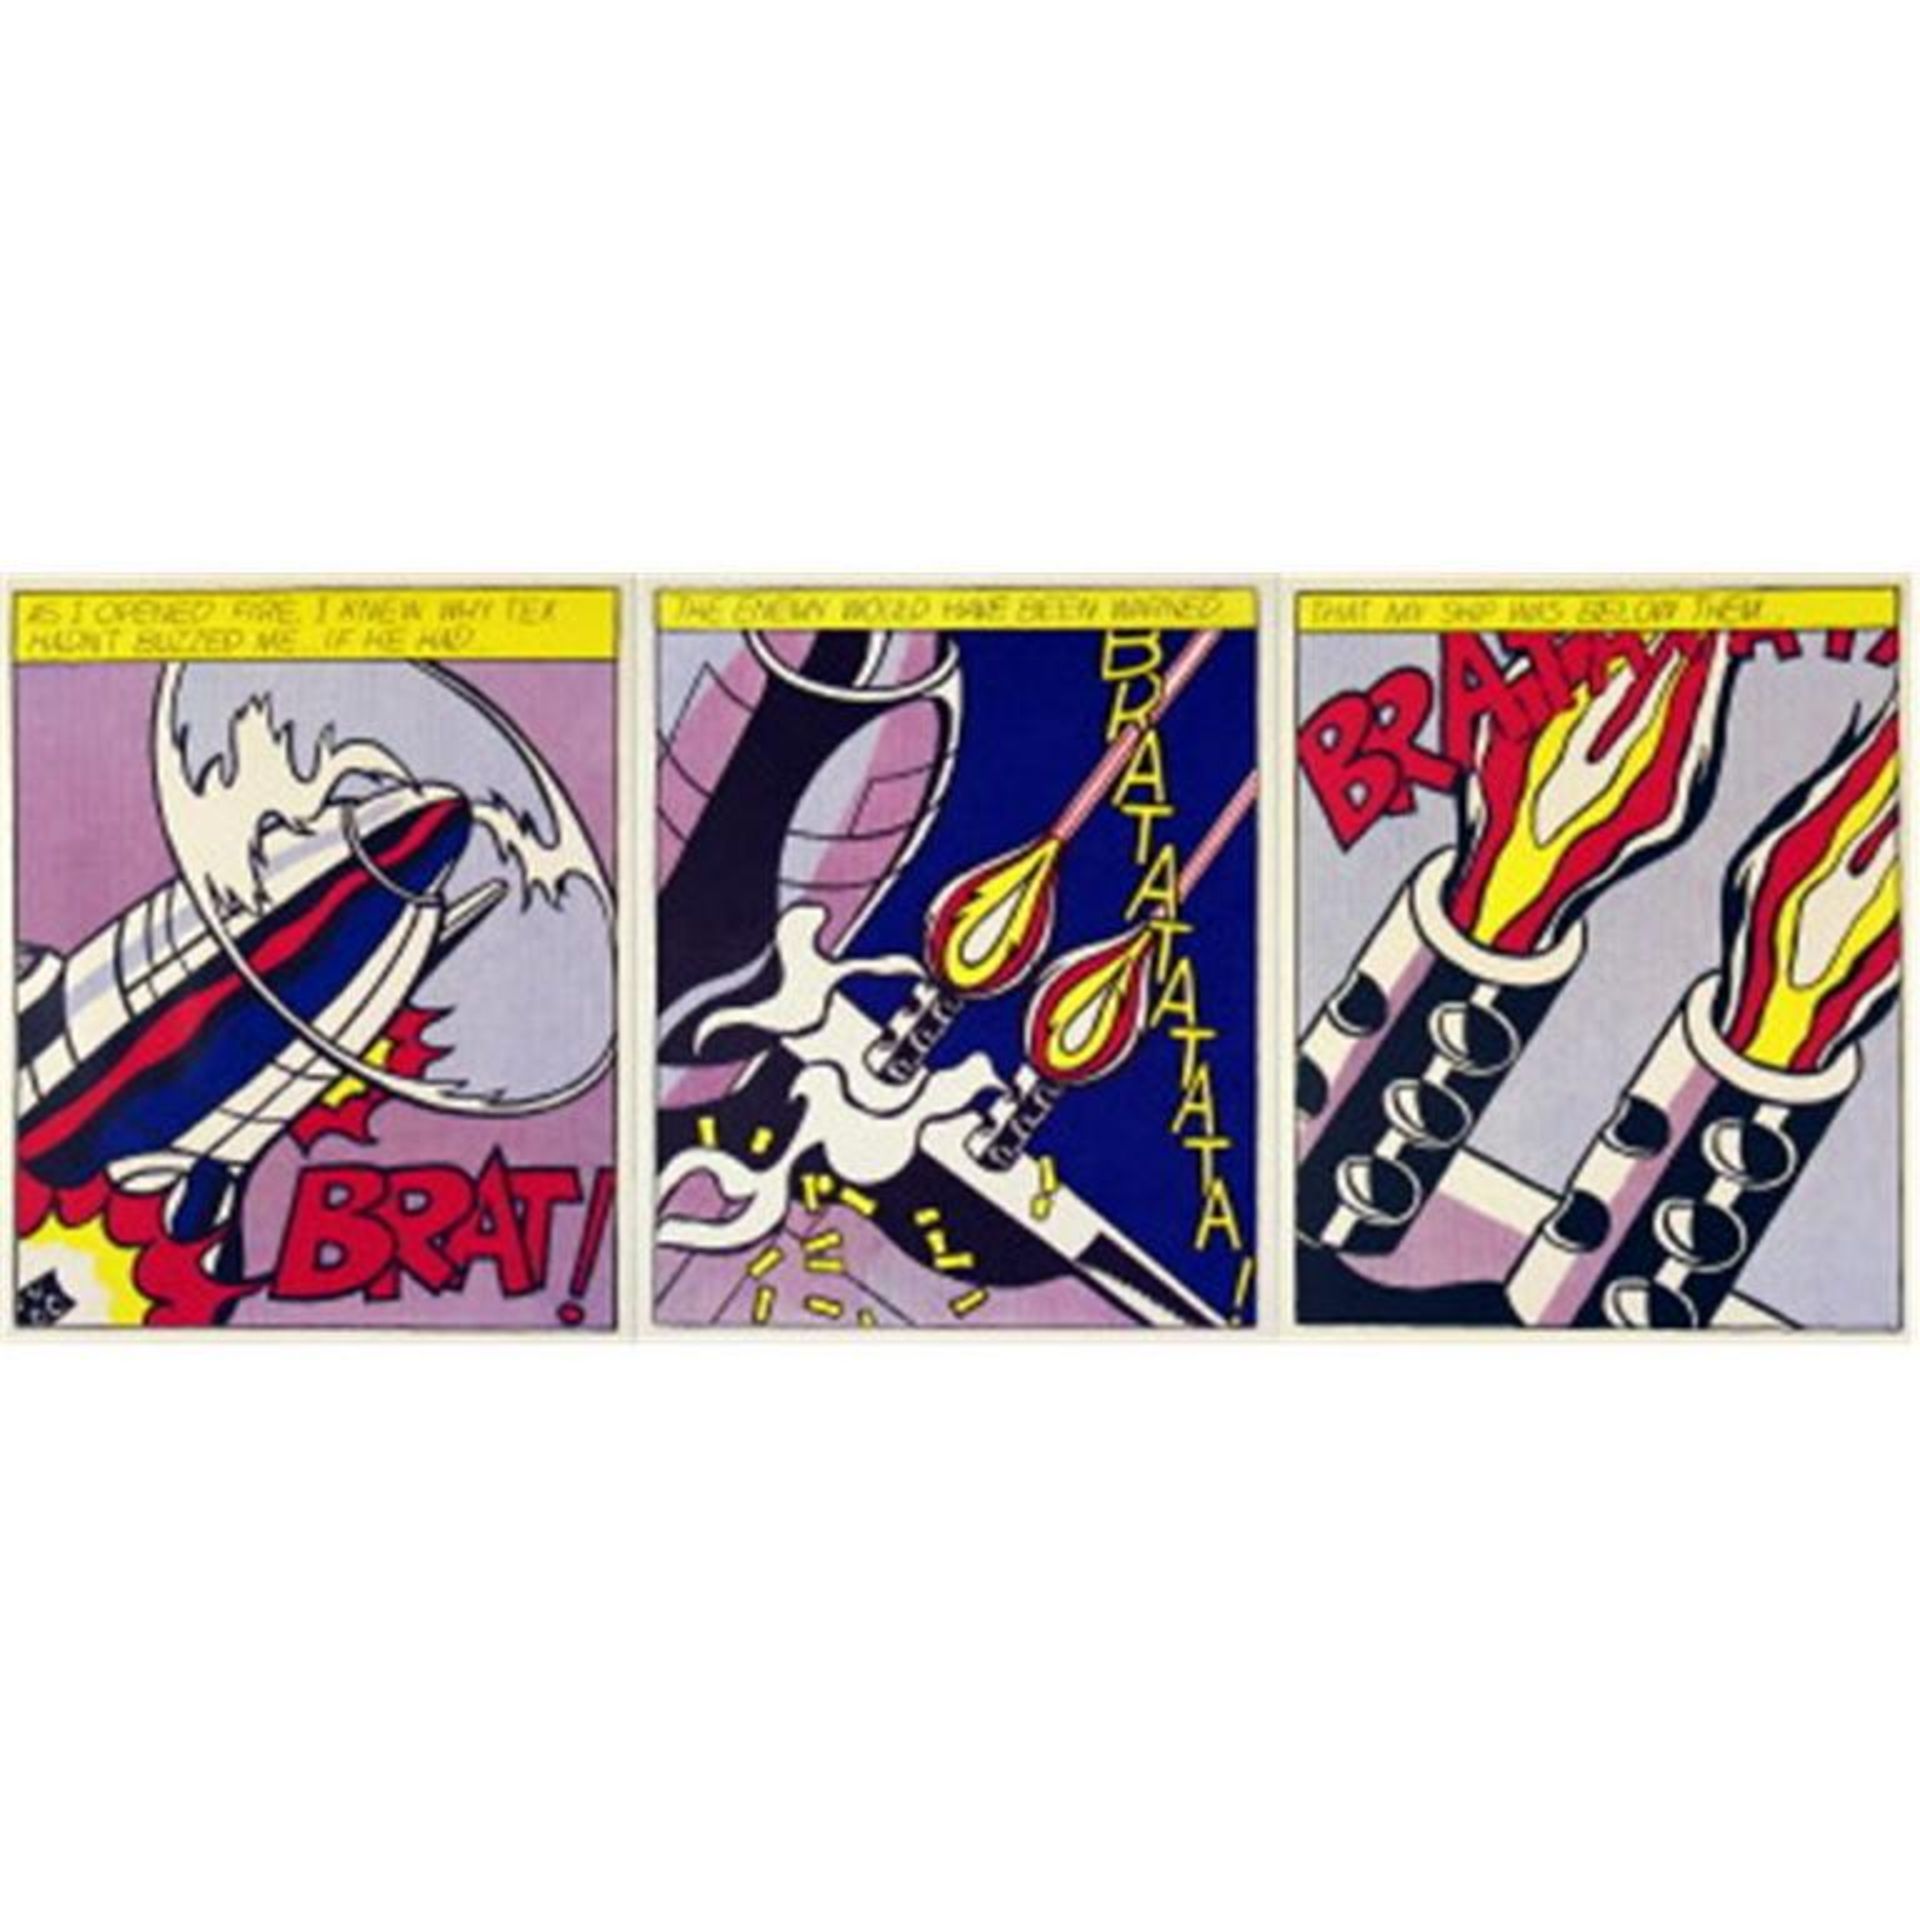 After Roy Lichtenstein (1932-1997) As i opened fire nach 1966 Offset-Lithographie Drei Poster - Image 2 of 2